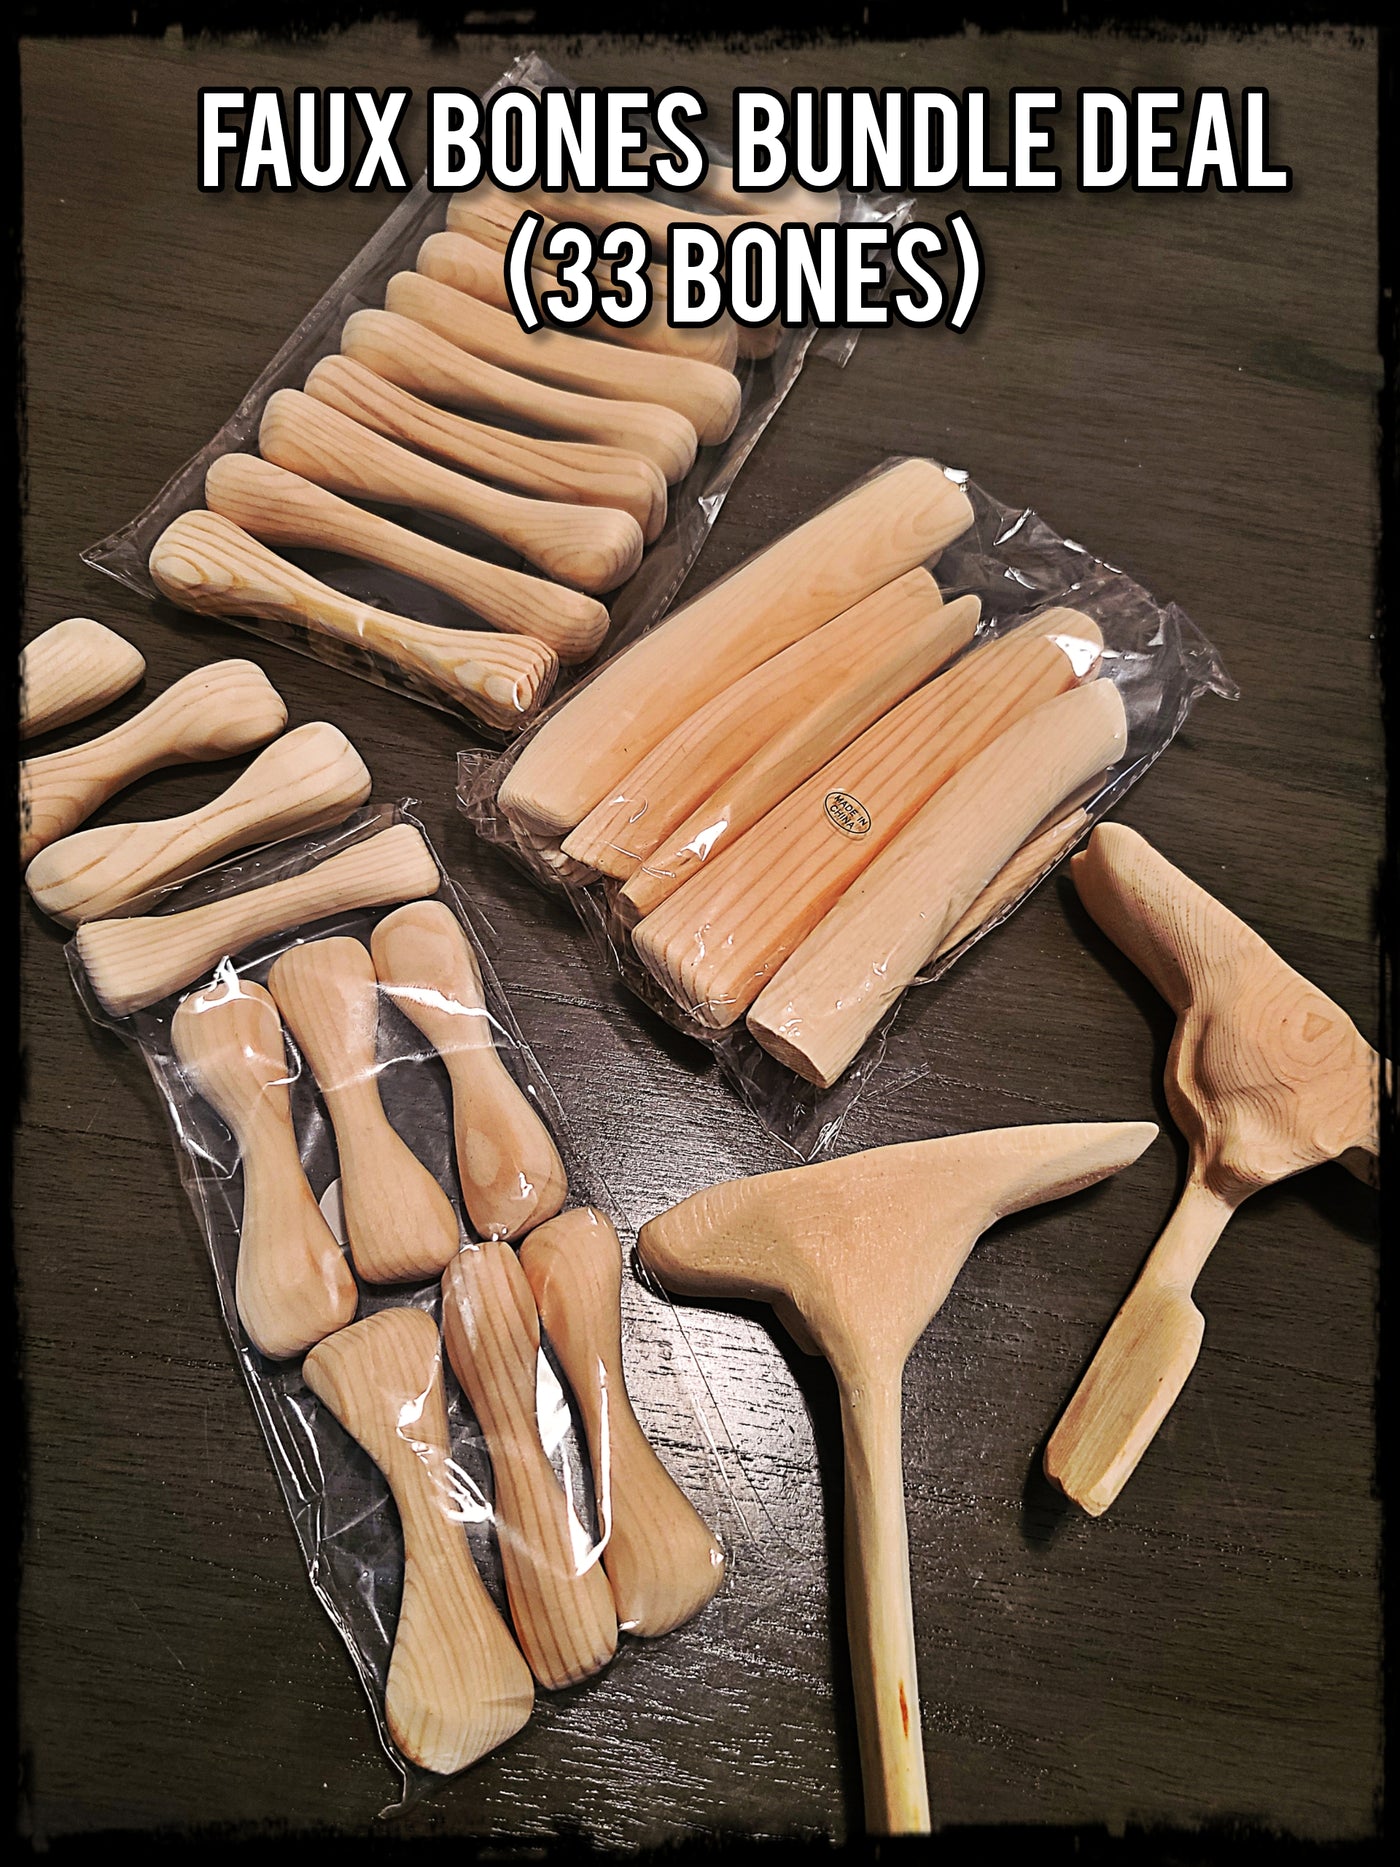 Bundle Deal! Try all 4 types of Faux Bones!